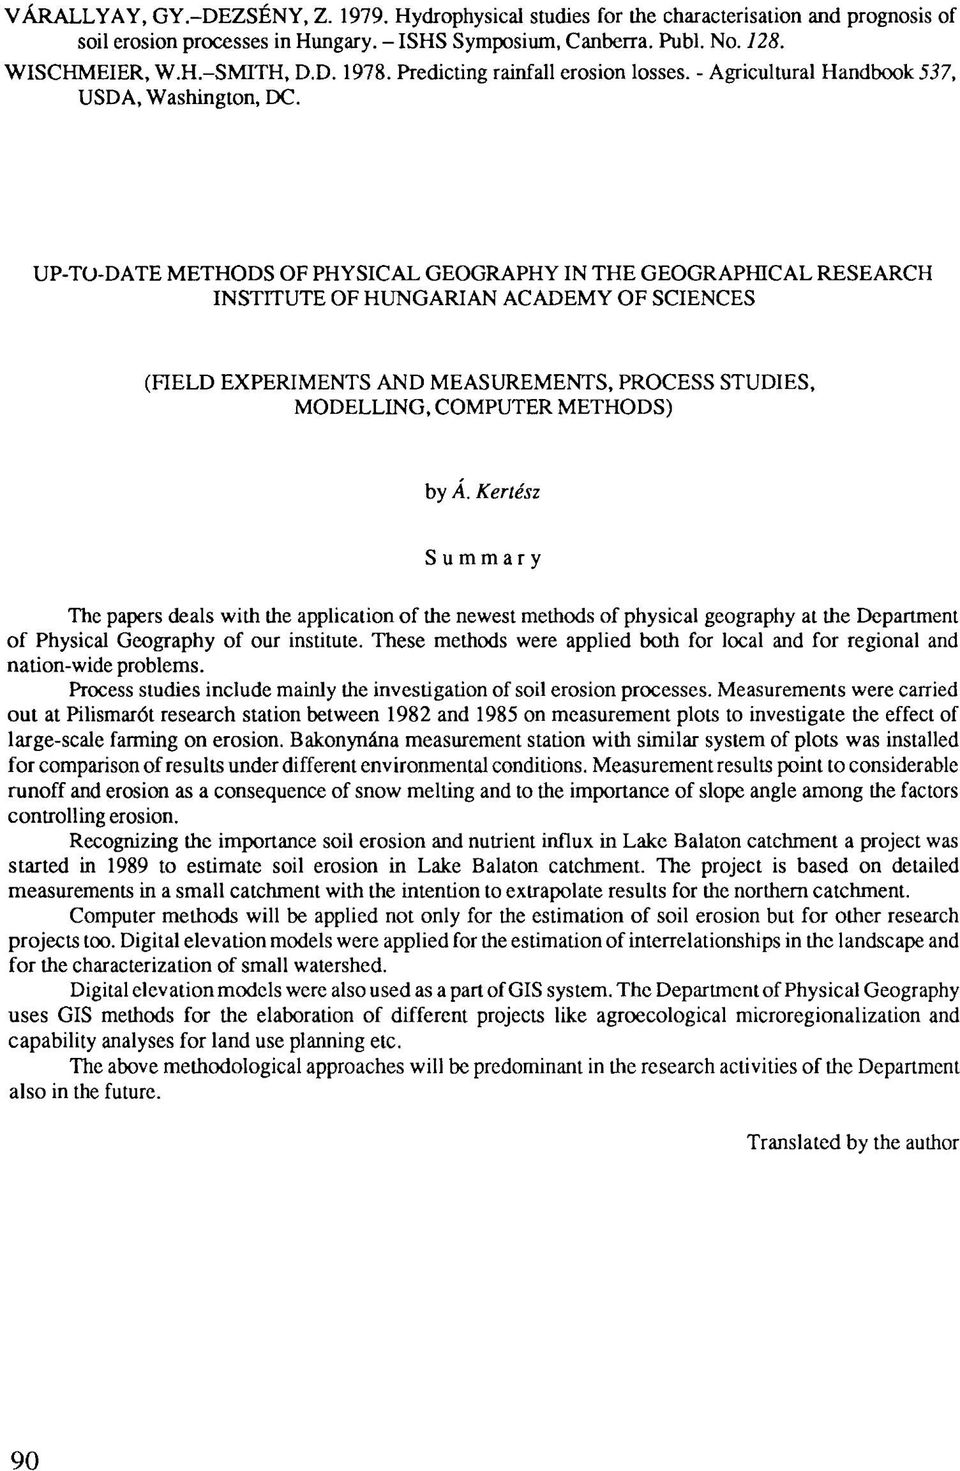 UP-TO-DATE METHODS OF PHYSICAL GEOGRAPHY IN THE GEOGRAPHICAL RESEARCH INSTITUTE OF HUNGARIAN ACADEMY OF SCIENCES (FIELD EXPERIMENTS AND MEASUREMENTS, PROCESS STUDIES, MODELLING, COMPUTER METHODS) by